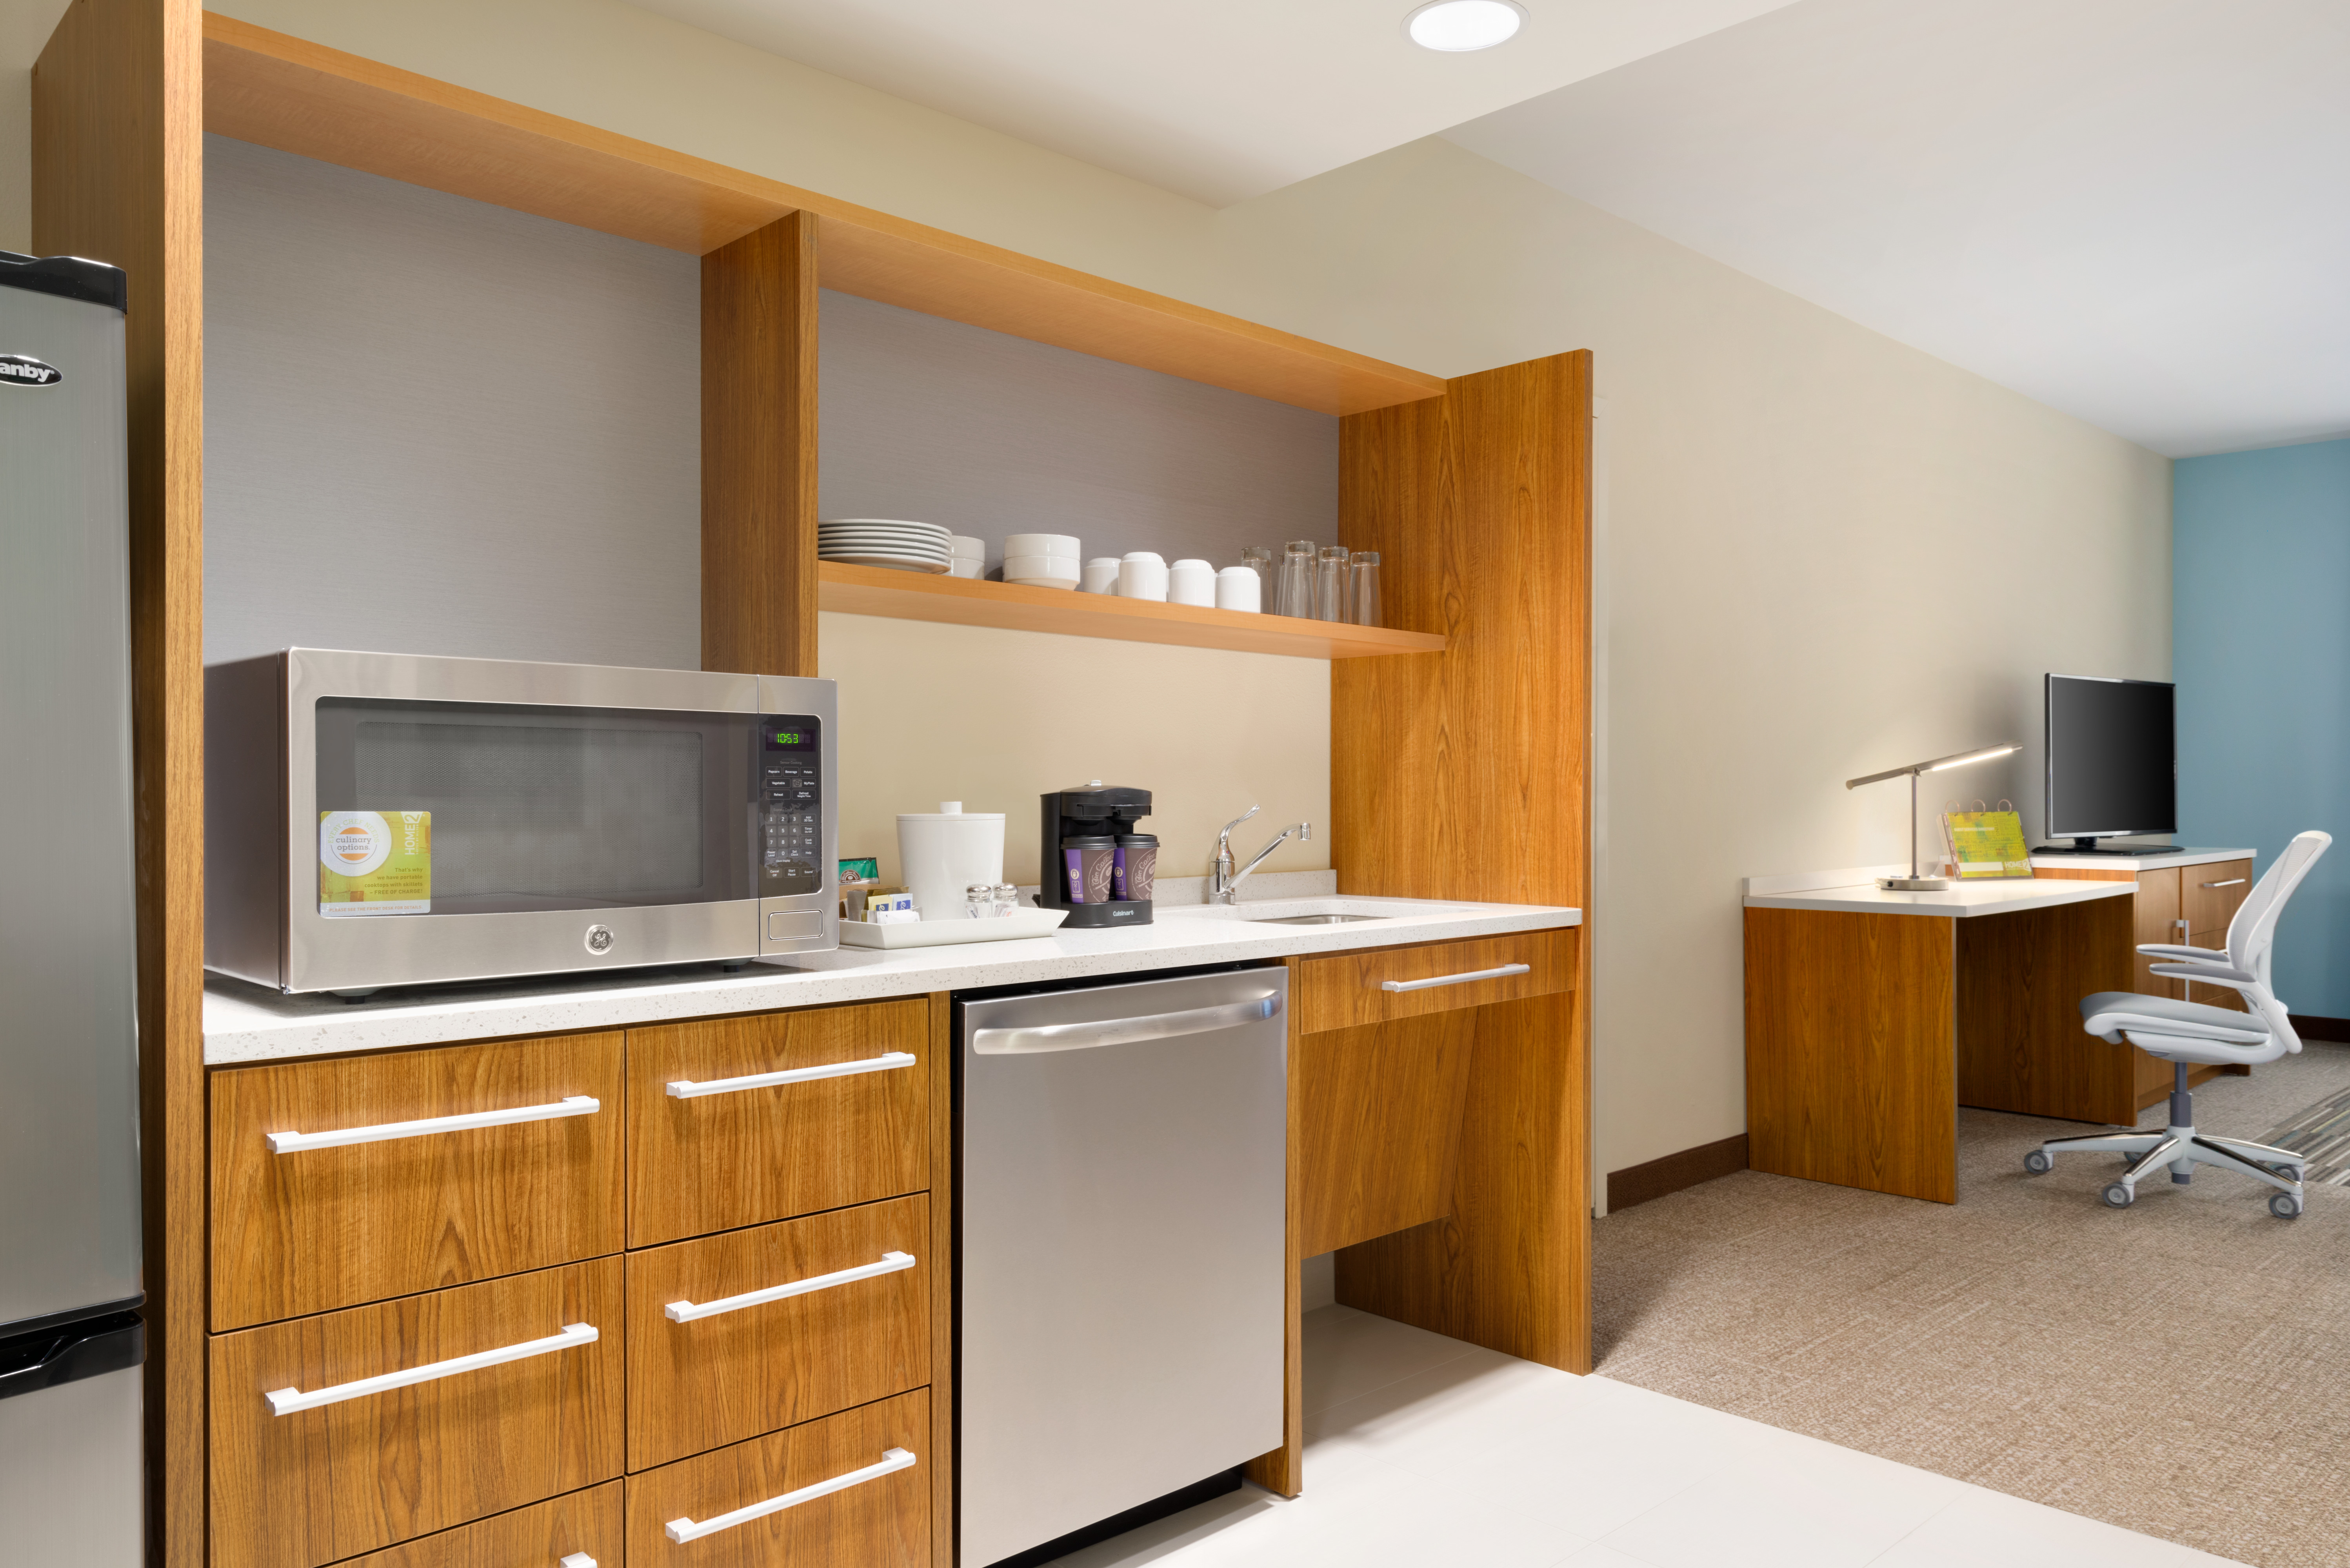 Guest Suite Kitchen Area with Microwave and Dishwasher Lounge Area Work Desk and HDTV in Background